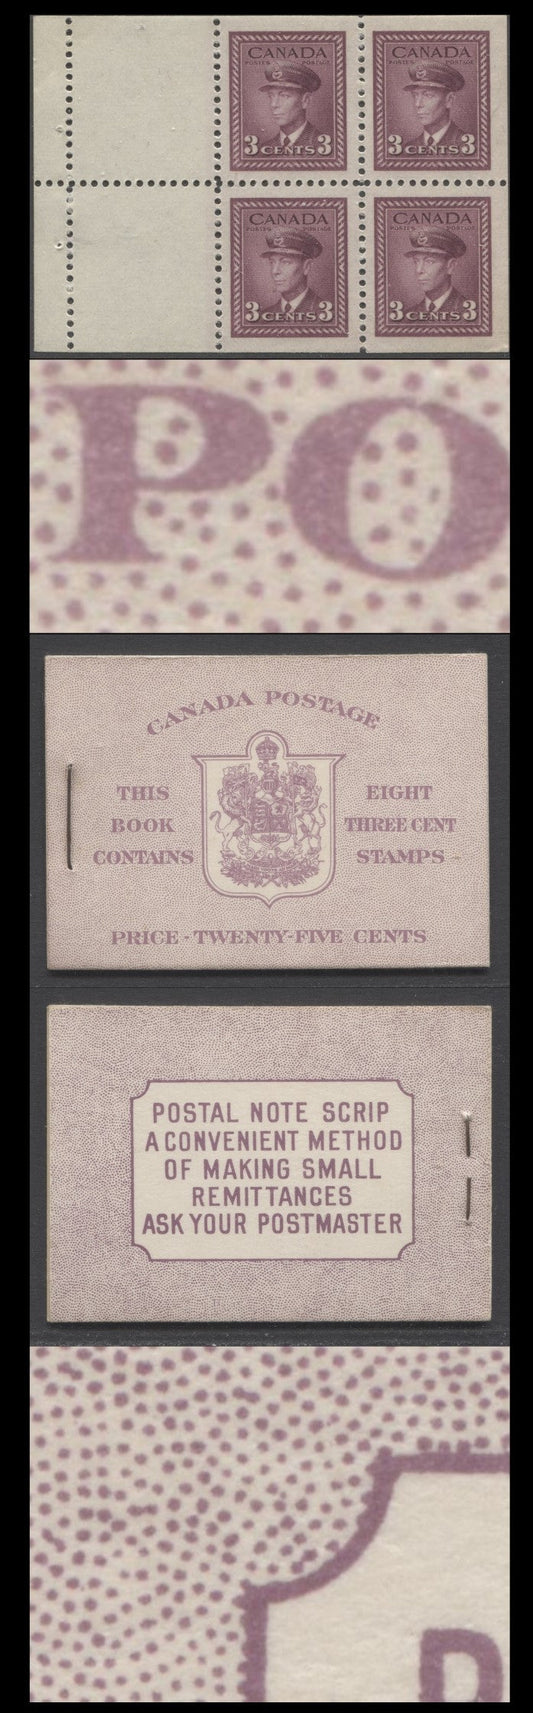 Lot 91 Canada #BK35dE 1942-1947 War Issue, A Complete 25c English Booklet, 2 Panes Of 4+2 Labels 3c Rose Violet, Front Cover IIe, Back Cover Caiii, Type II, 7c & 5c Rates Page, 1,201,000 Issued